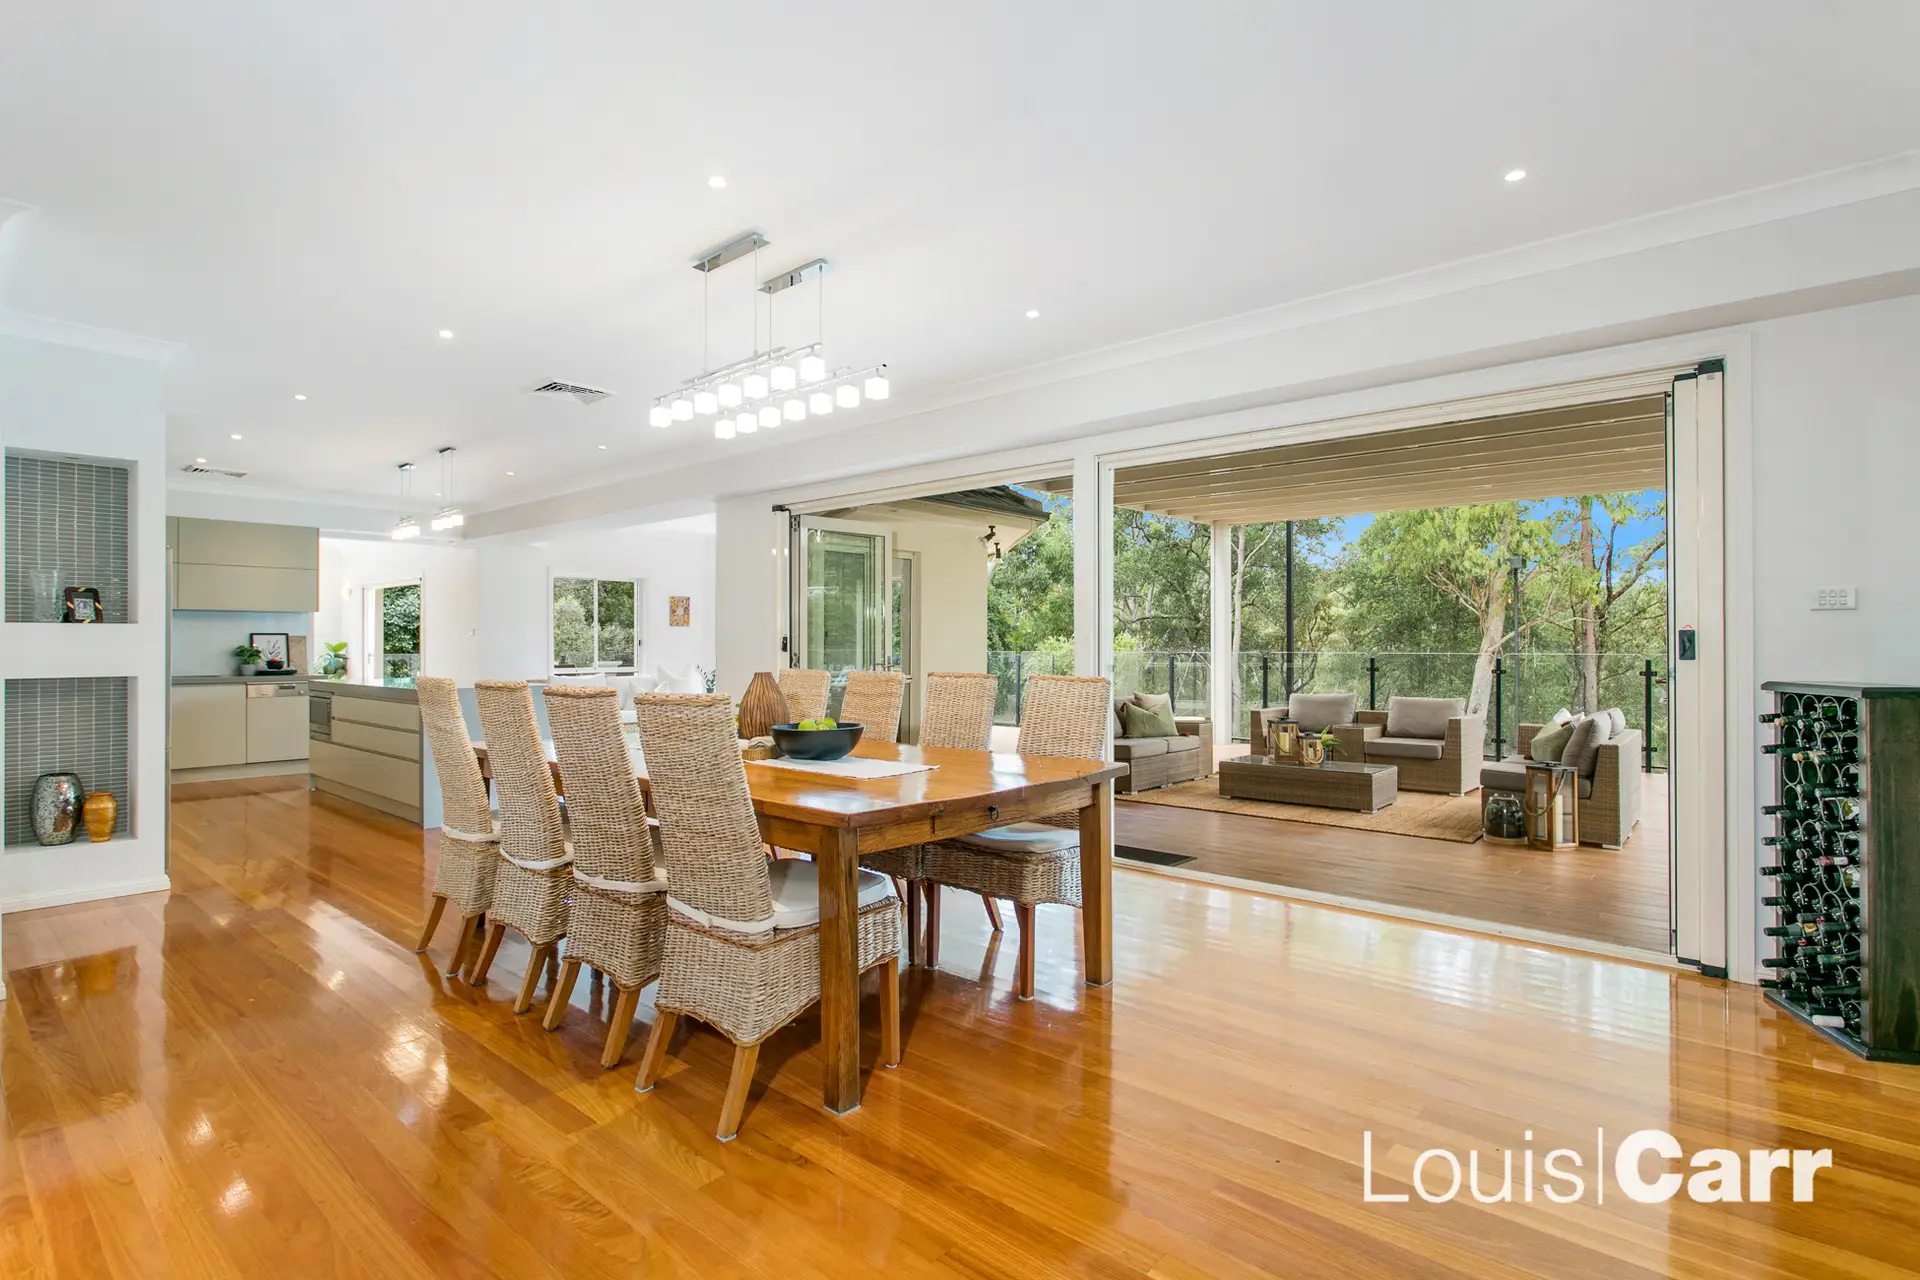 Photo #5: 4 Governor Phillip Place, West Pennant Hills - Sold by Louis Carr Real Estate